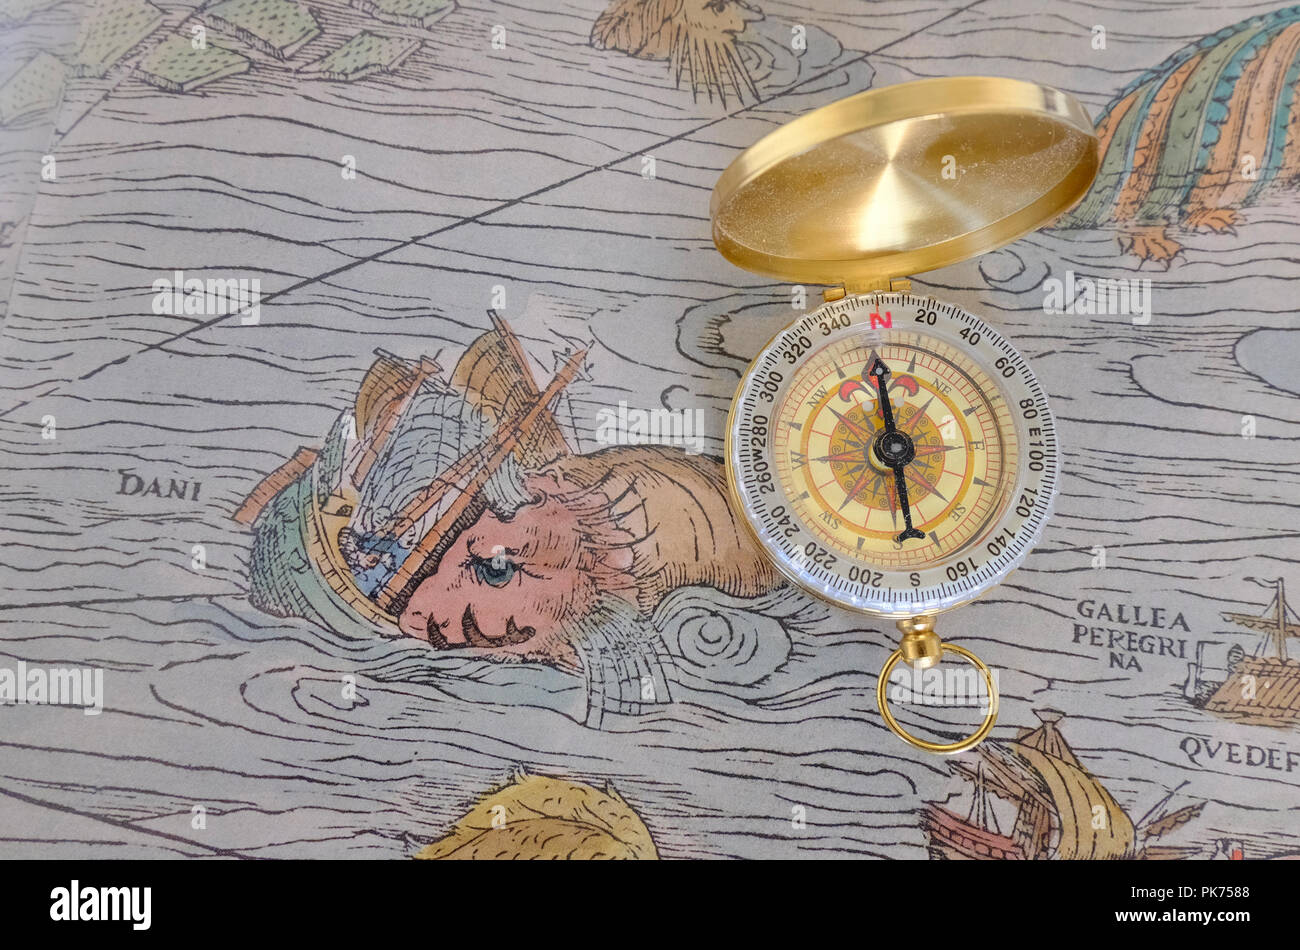 Compass placed on top of reproduction of section of Olaus Magnus's 16th century Marine Map featuring a Prister sinking a ship Stock Photo